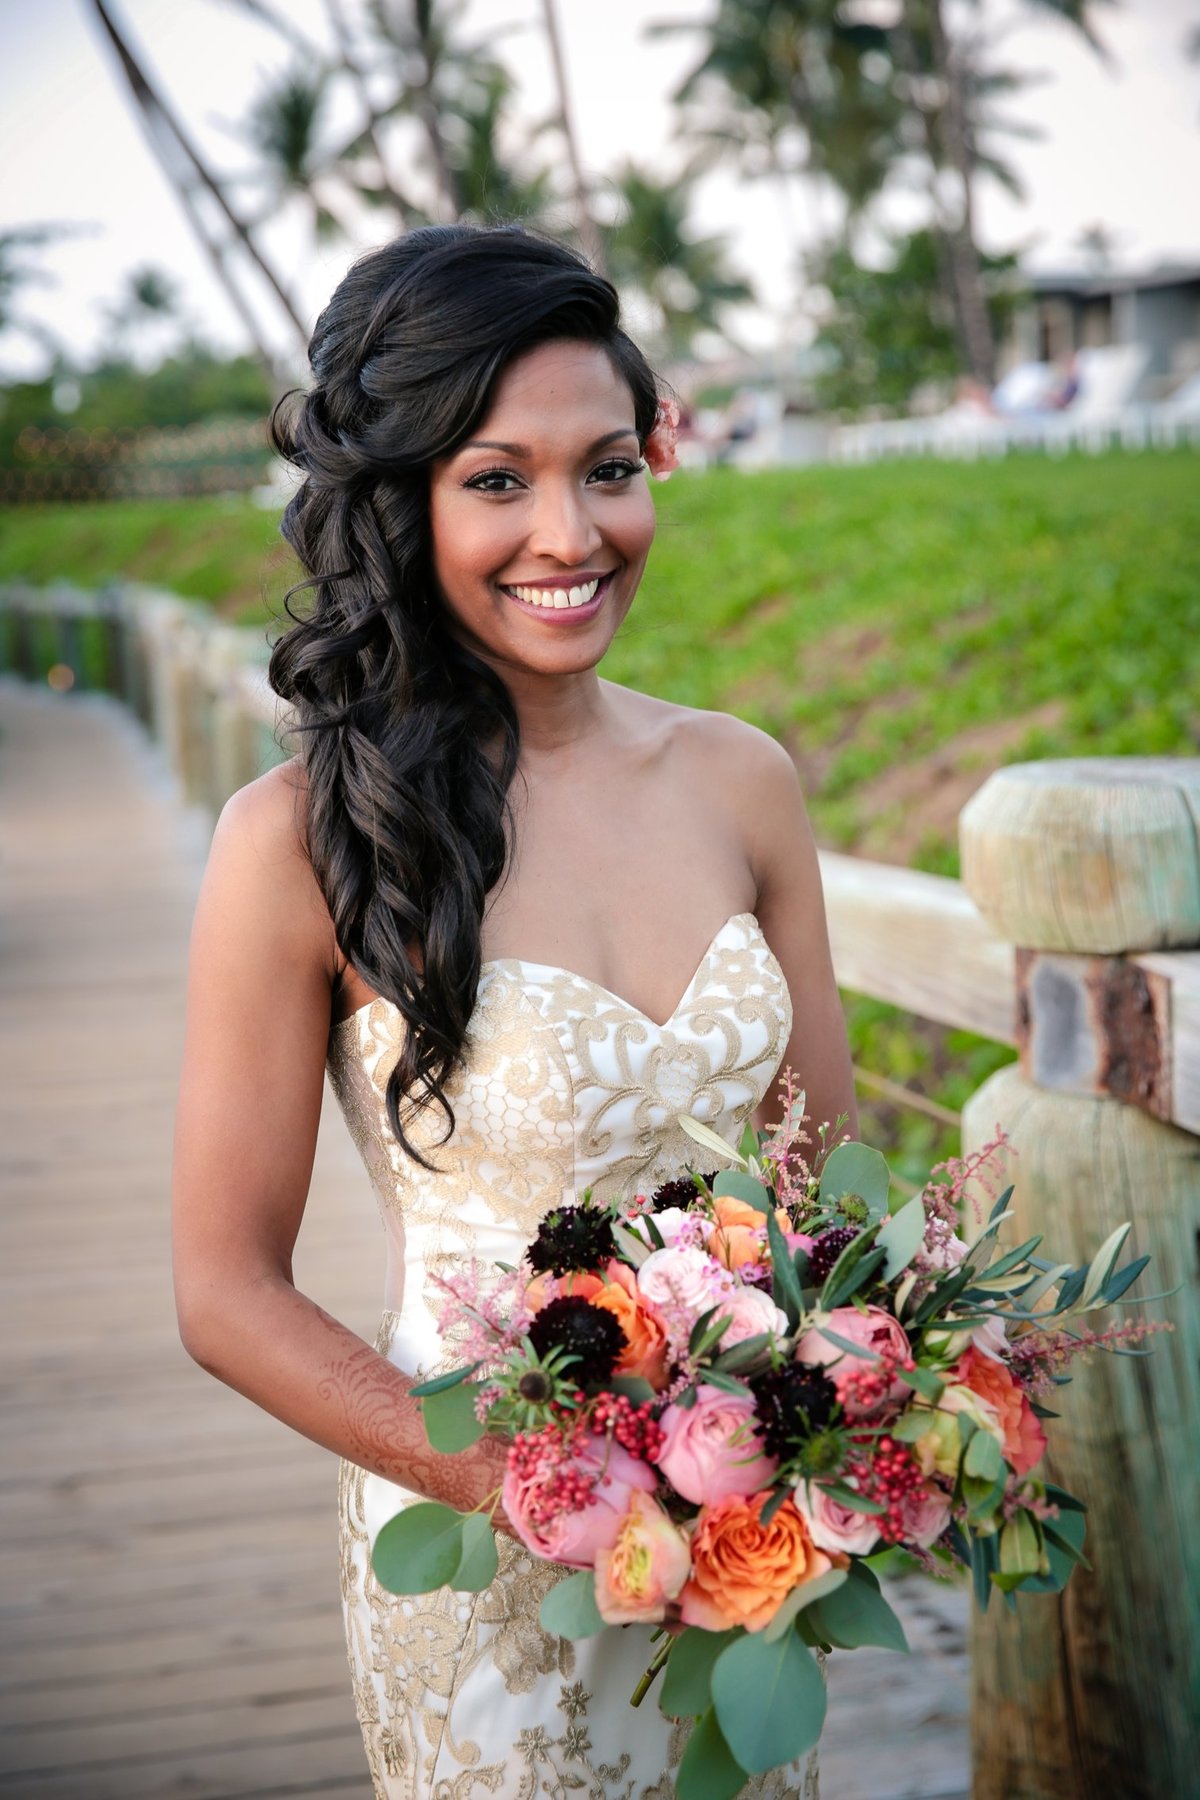 Maui Wedding Photography at The Andaz Maui Wailea of the bride with her bouquet